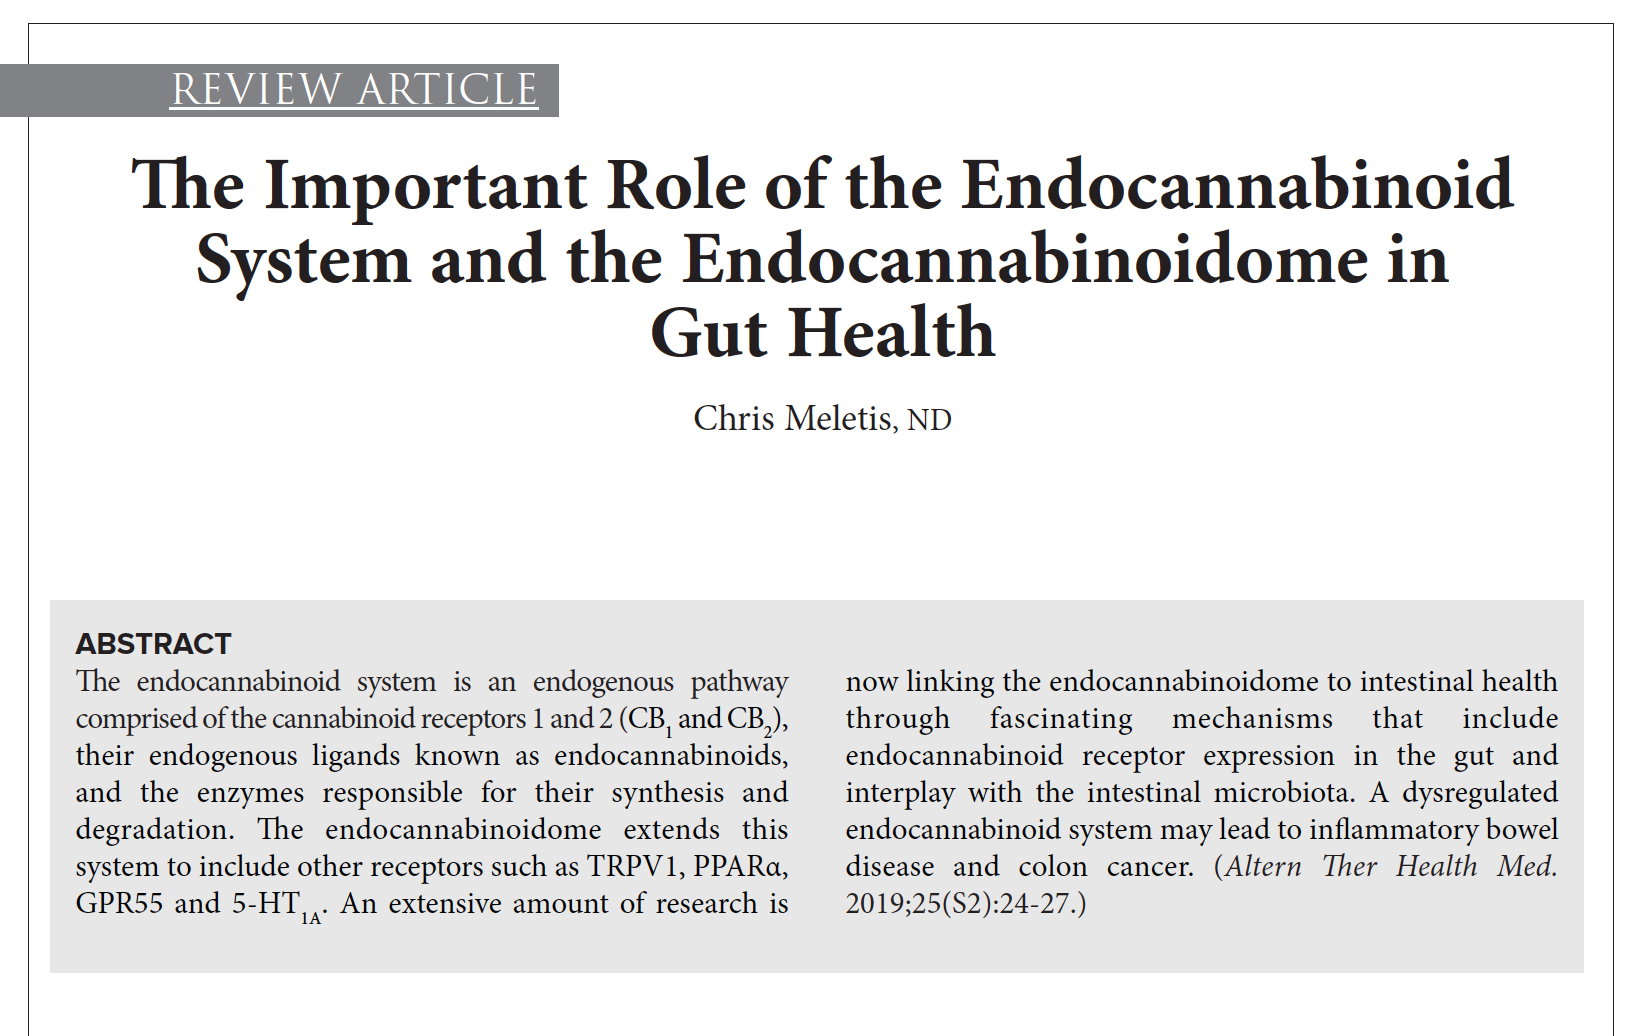 The Important Role of the Endocannabinoid System and the Endocannabinoidome in Gut Health